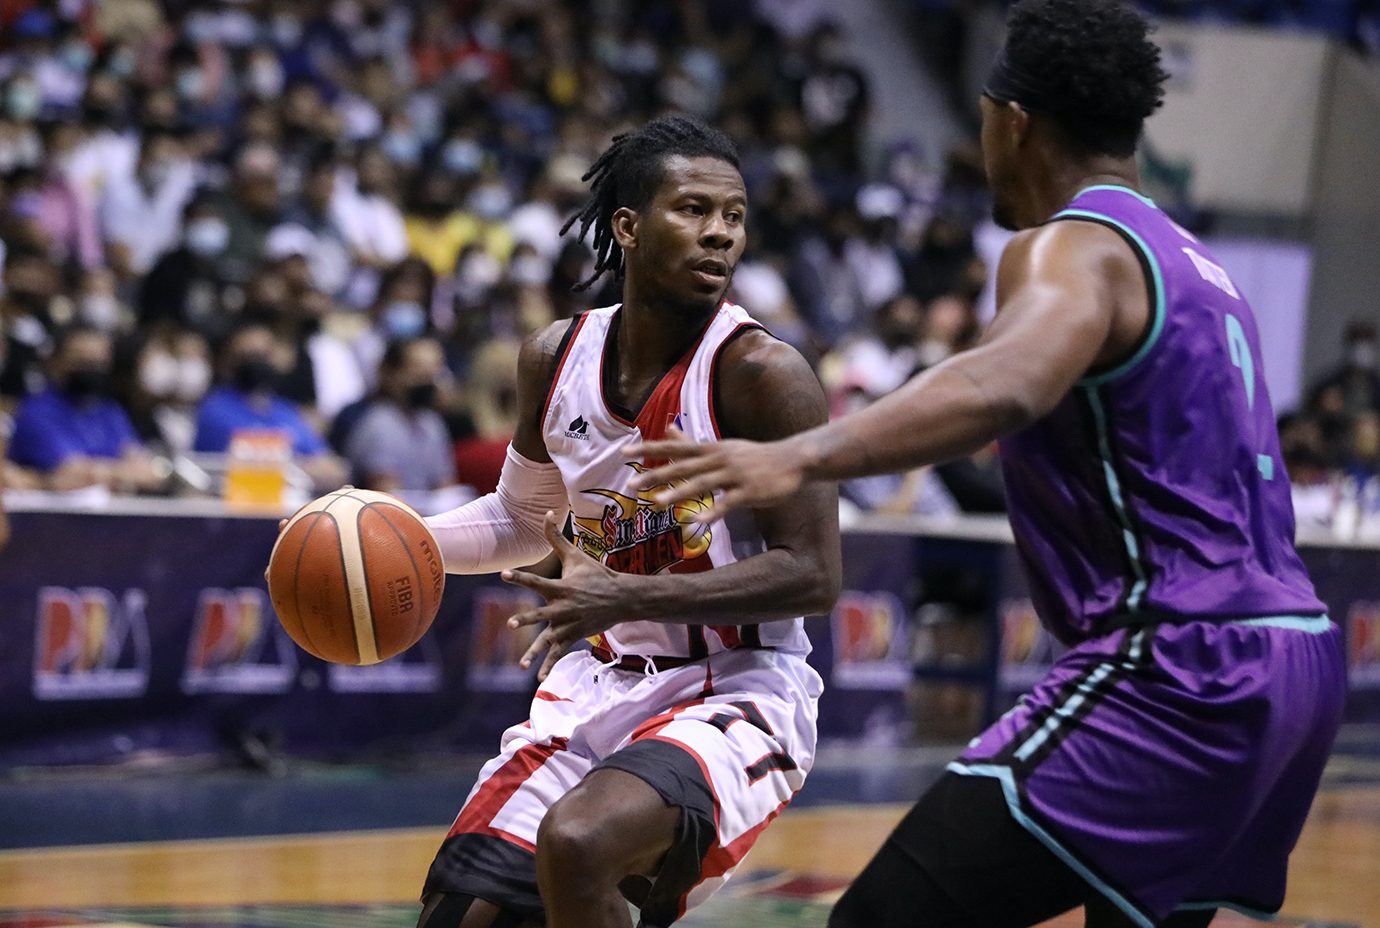 Undermanned San Miguel waylays Converge to gain share of lead